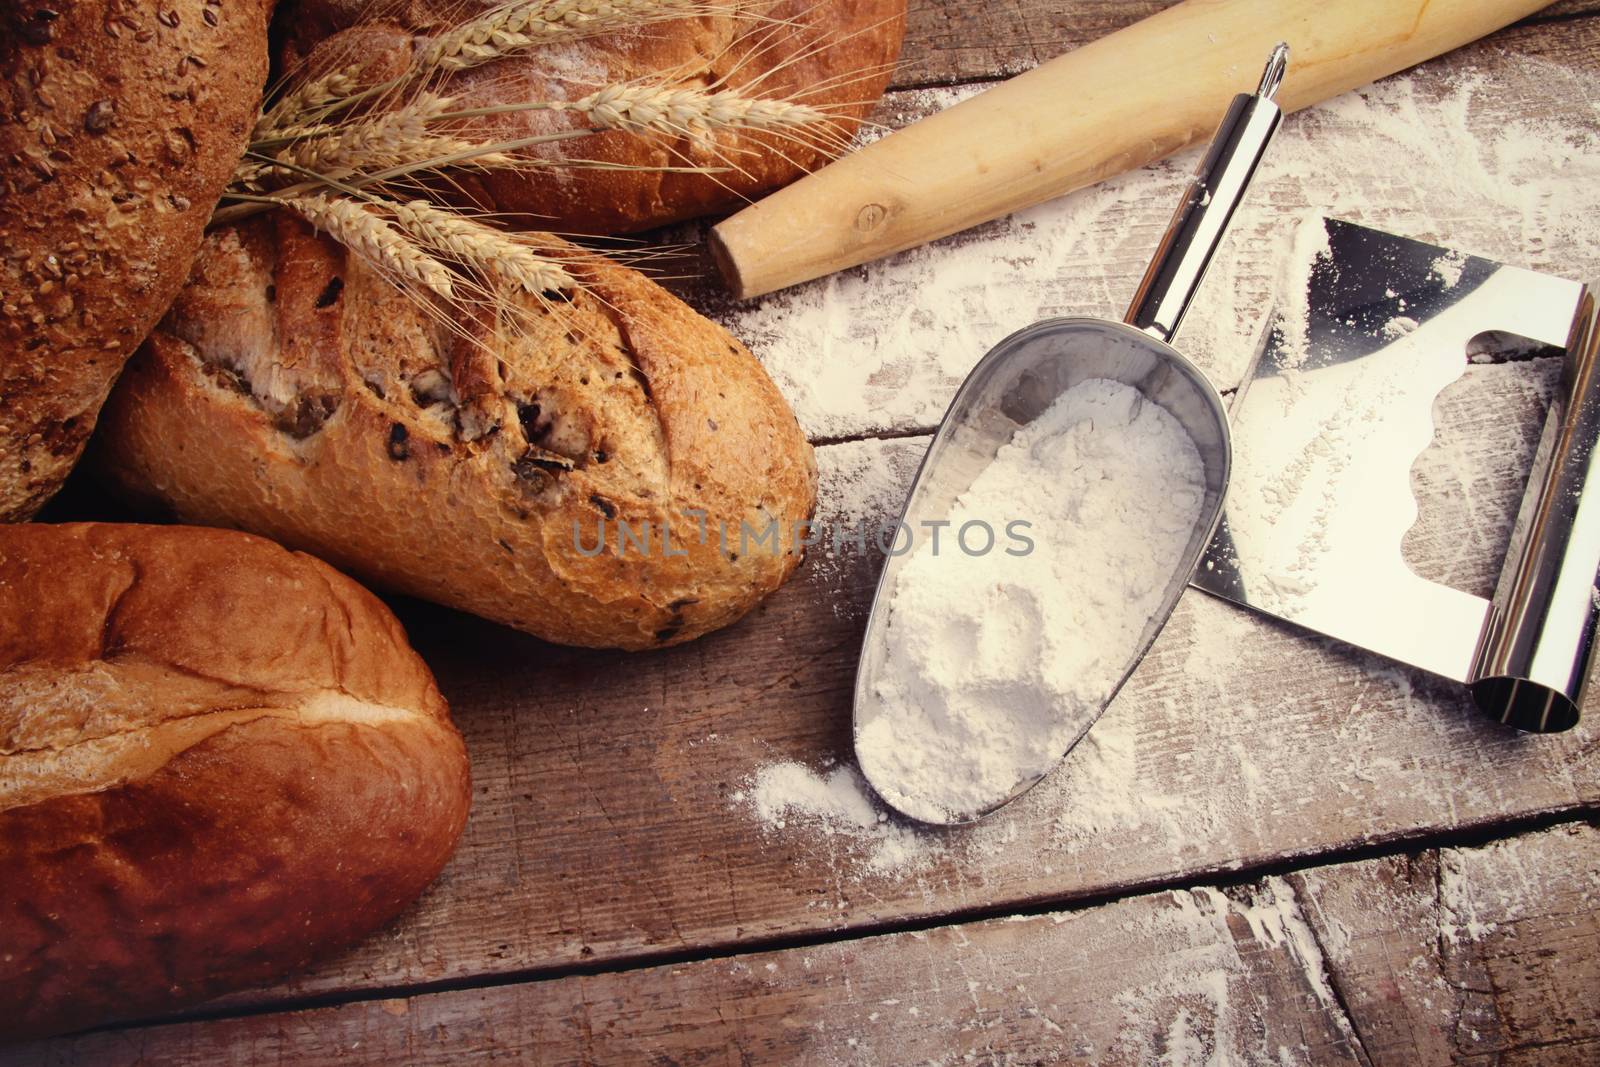 Homemade breads with cooking utensils by Sandralise